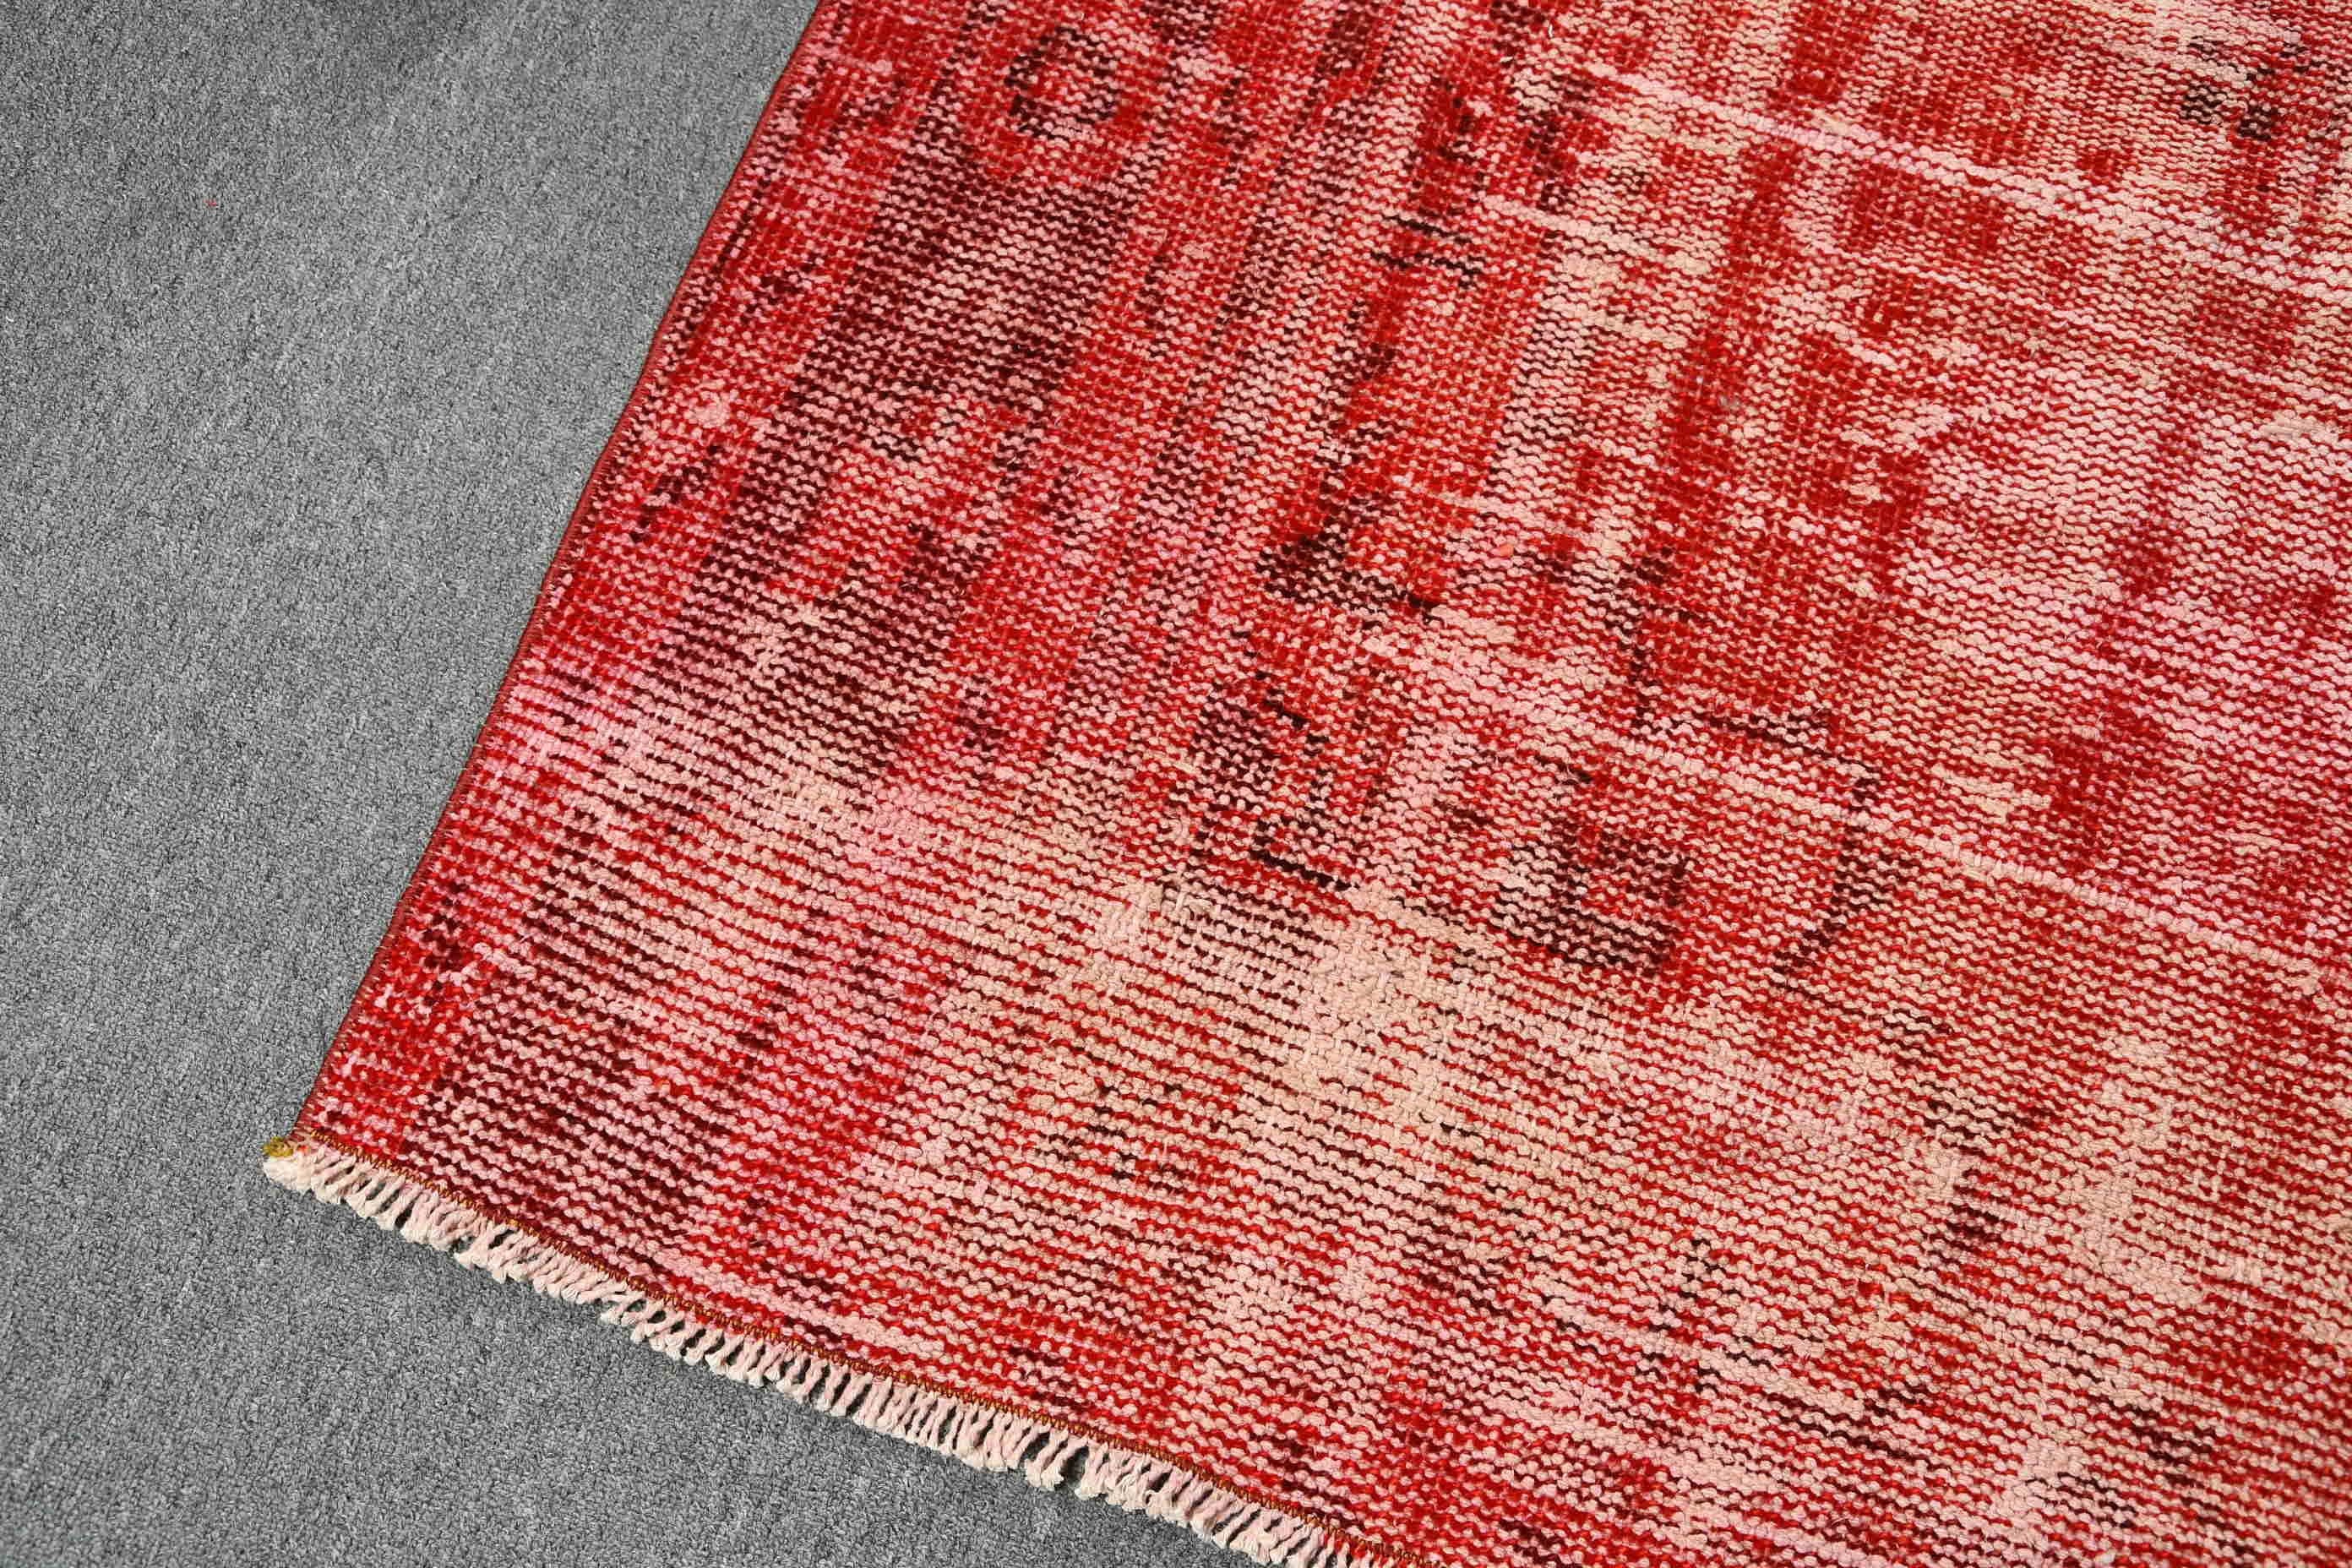 Nursery Rugs, 4.5x8.4 ft Area Rug, Antique Rug, Cool Rug, Vintage Rug, Red Moroccan Rugs, Kitchen Rugs, Turkish Rugs, Rugs for Kitchen